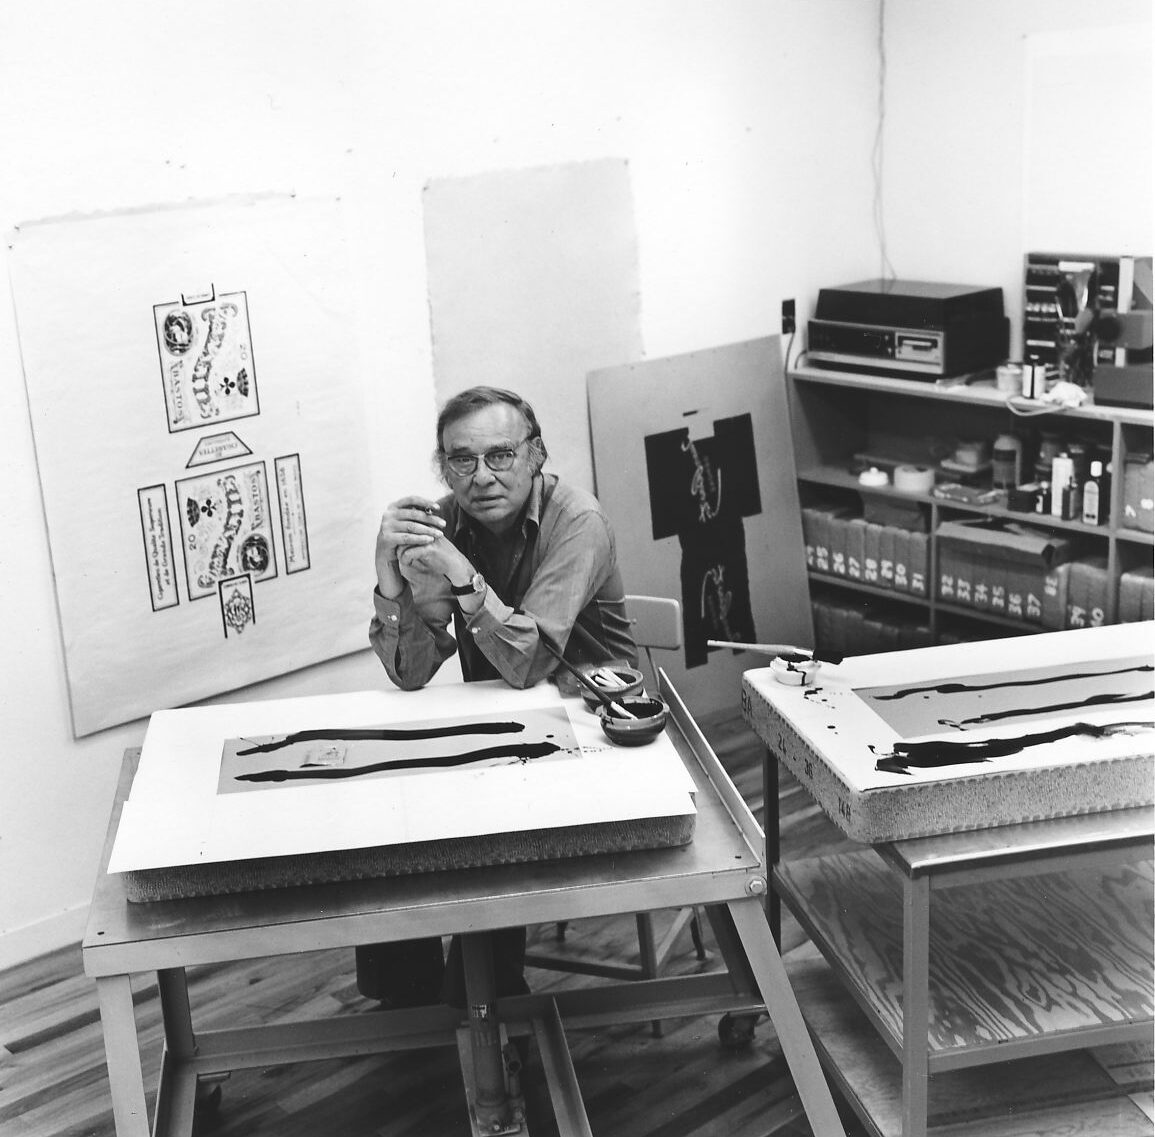 Motherwell working at Tyler Graphics, fall 1974